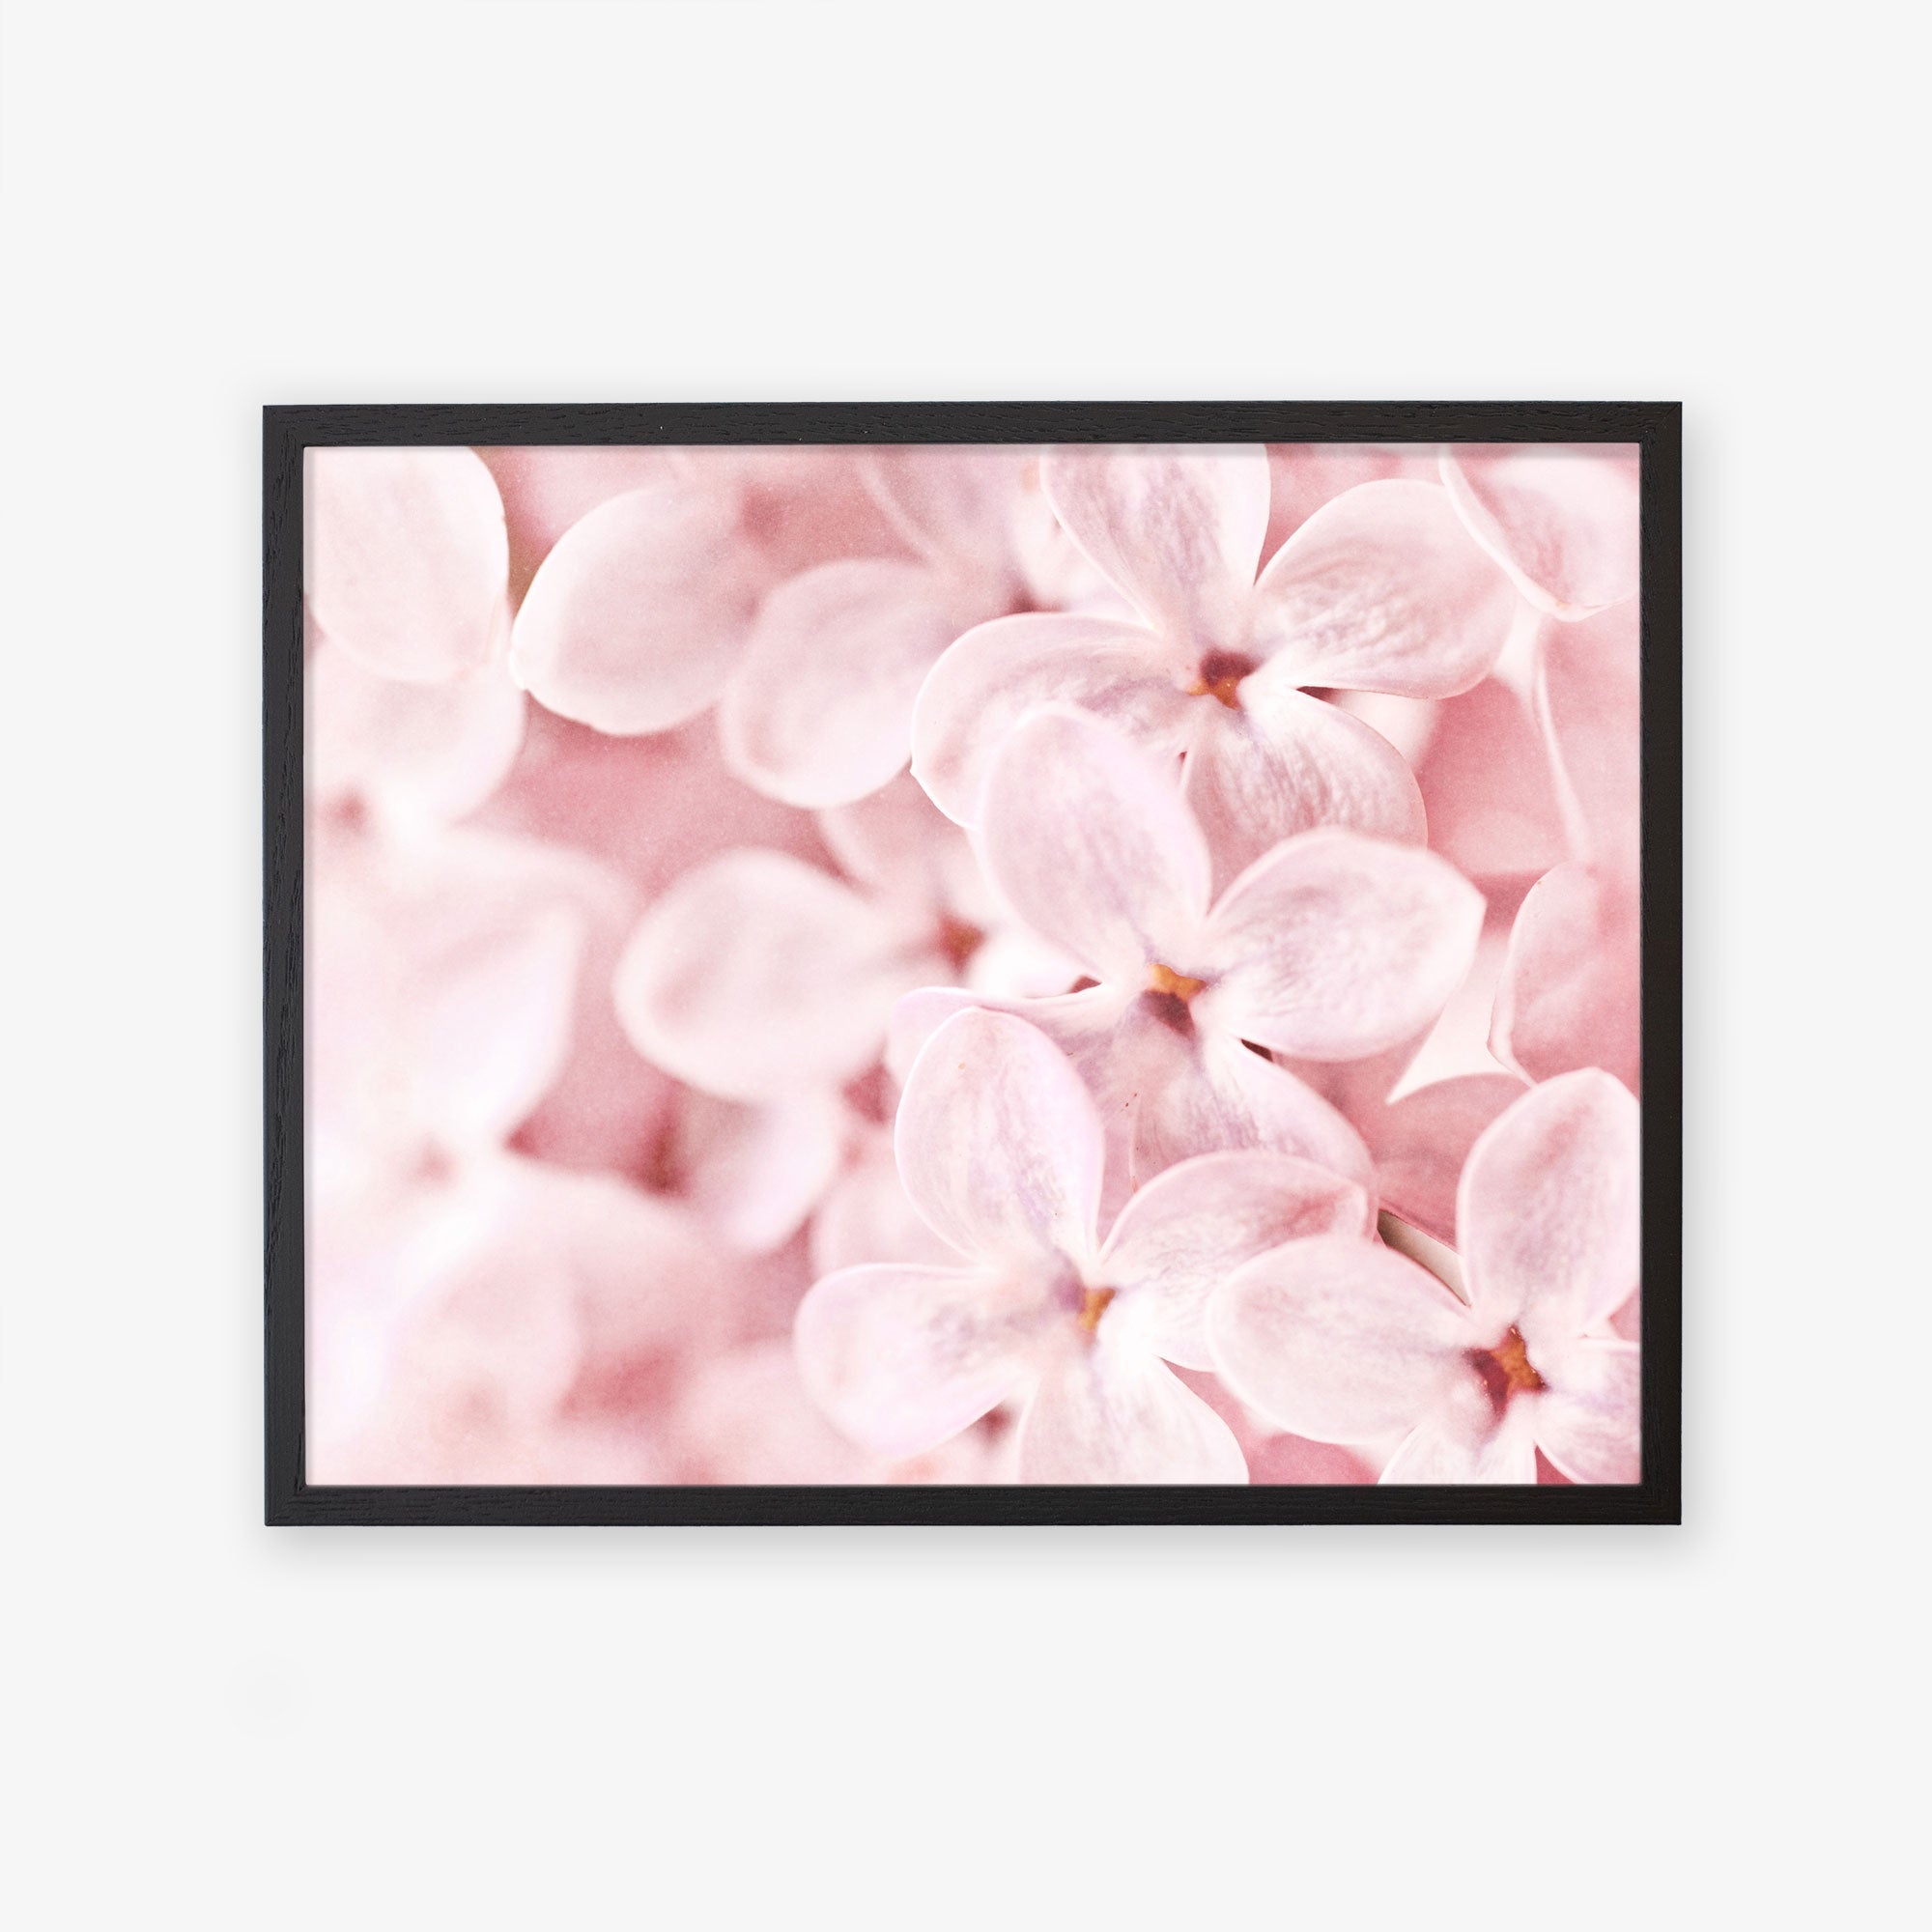 A framed photograph of delicate pink lilac blooms clustered tightly together, printed on archival photographic paper, displayed against a soft-focused background. 
Product Name: Pink Botanical Print, &#39;Bed of Lilacs&#39;
Brand Name: Offley Green